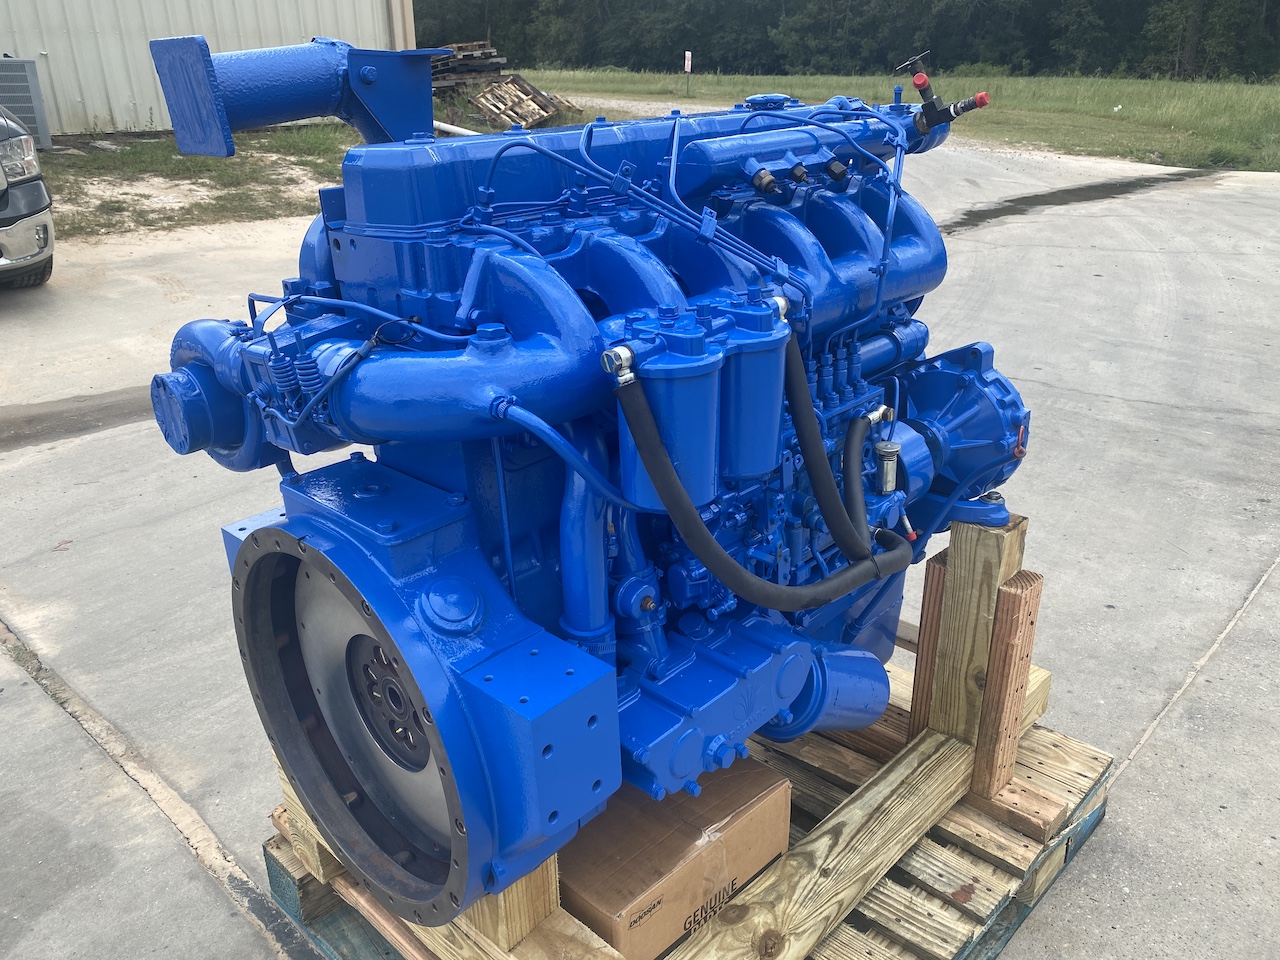 engine-shipping-stand-image-4.jpg